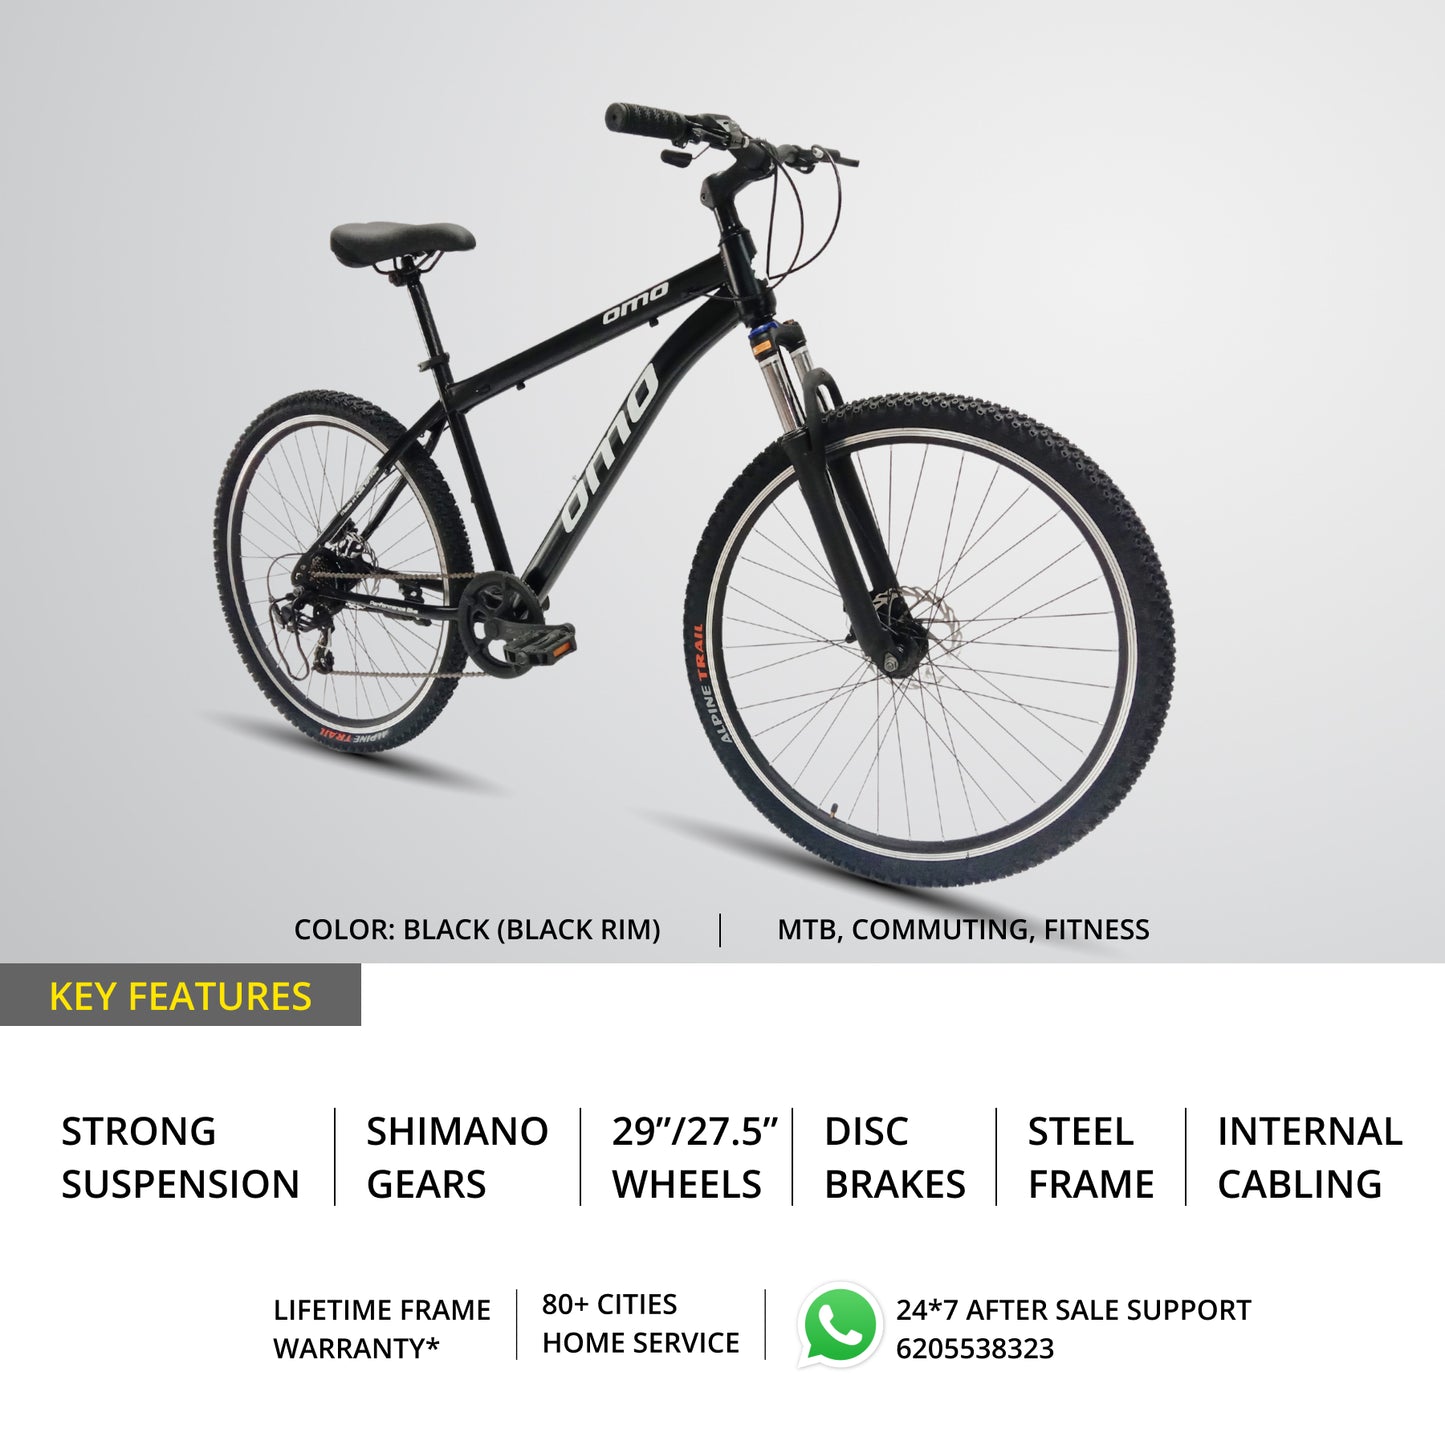 OMO bikes steel MTB bike shillong key features shimano gear mountain bike with suspension disc brakes in black color